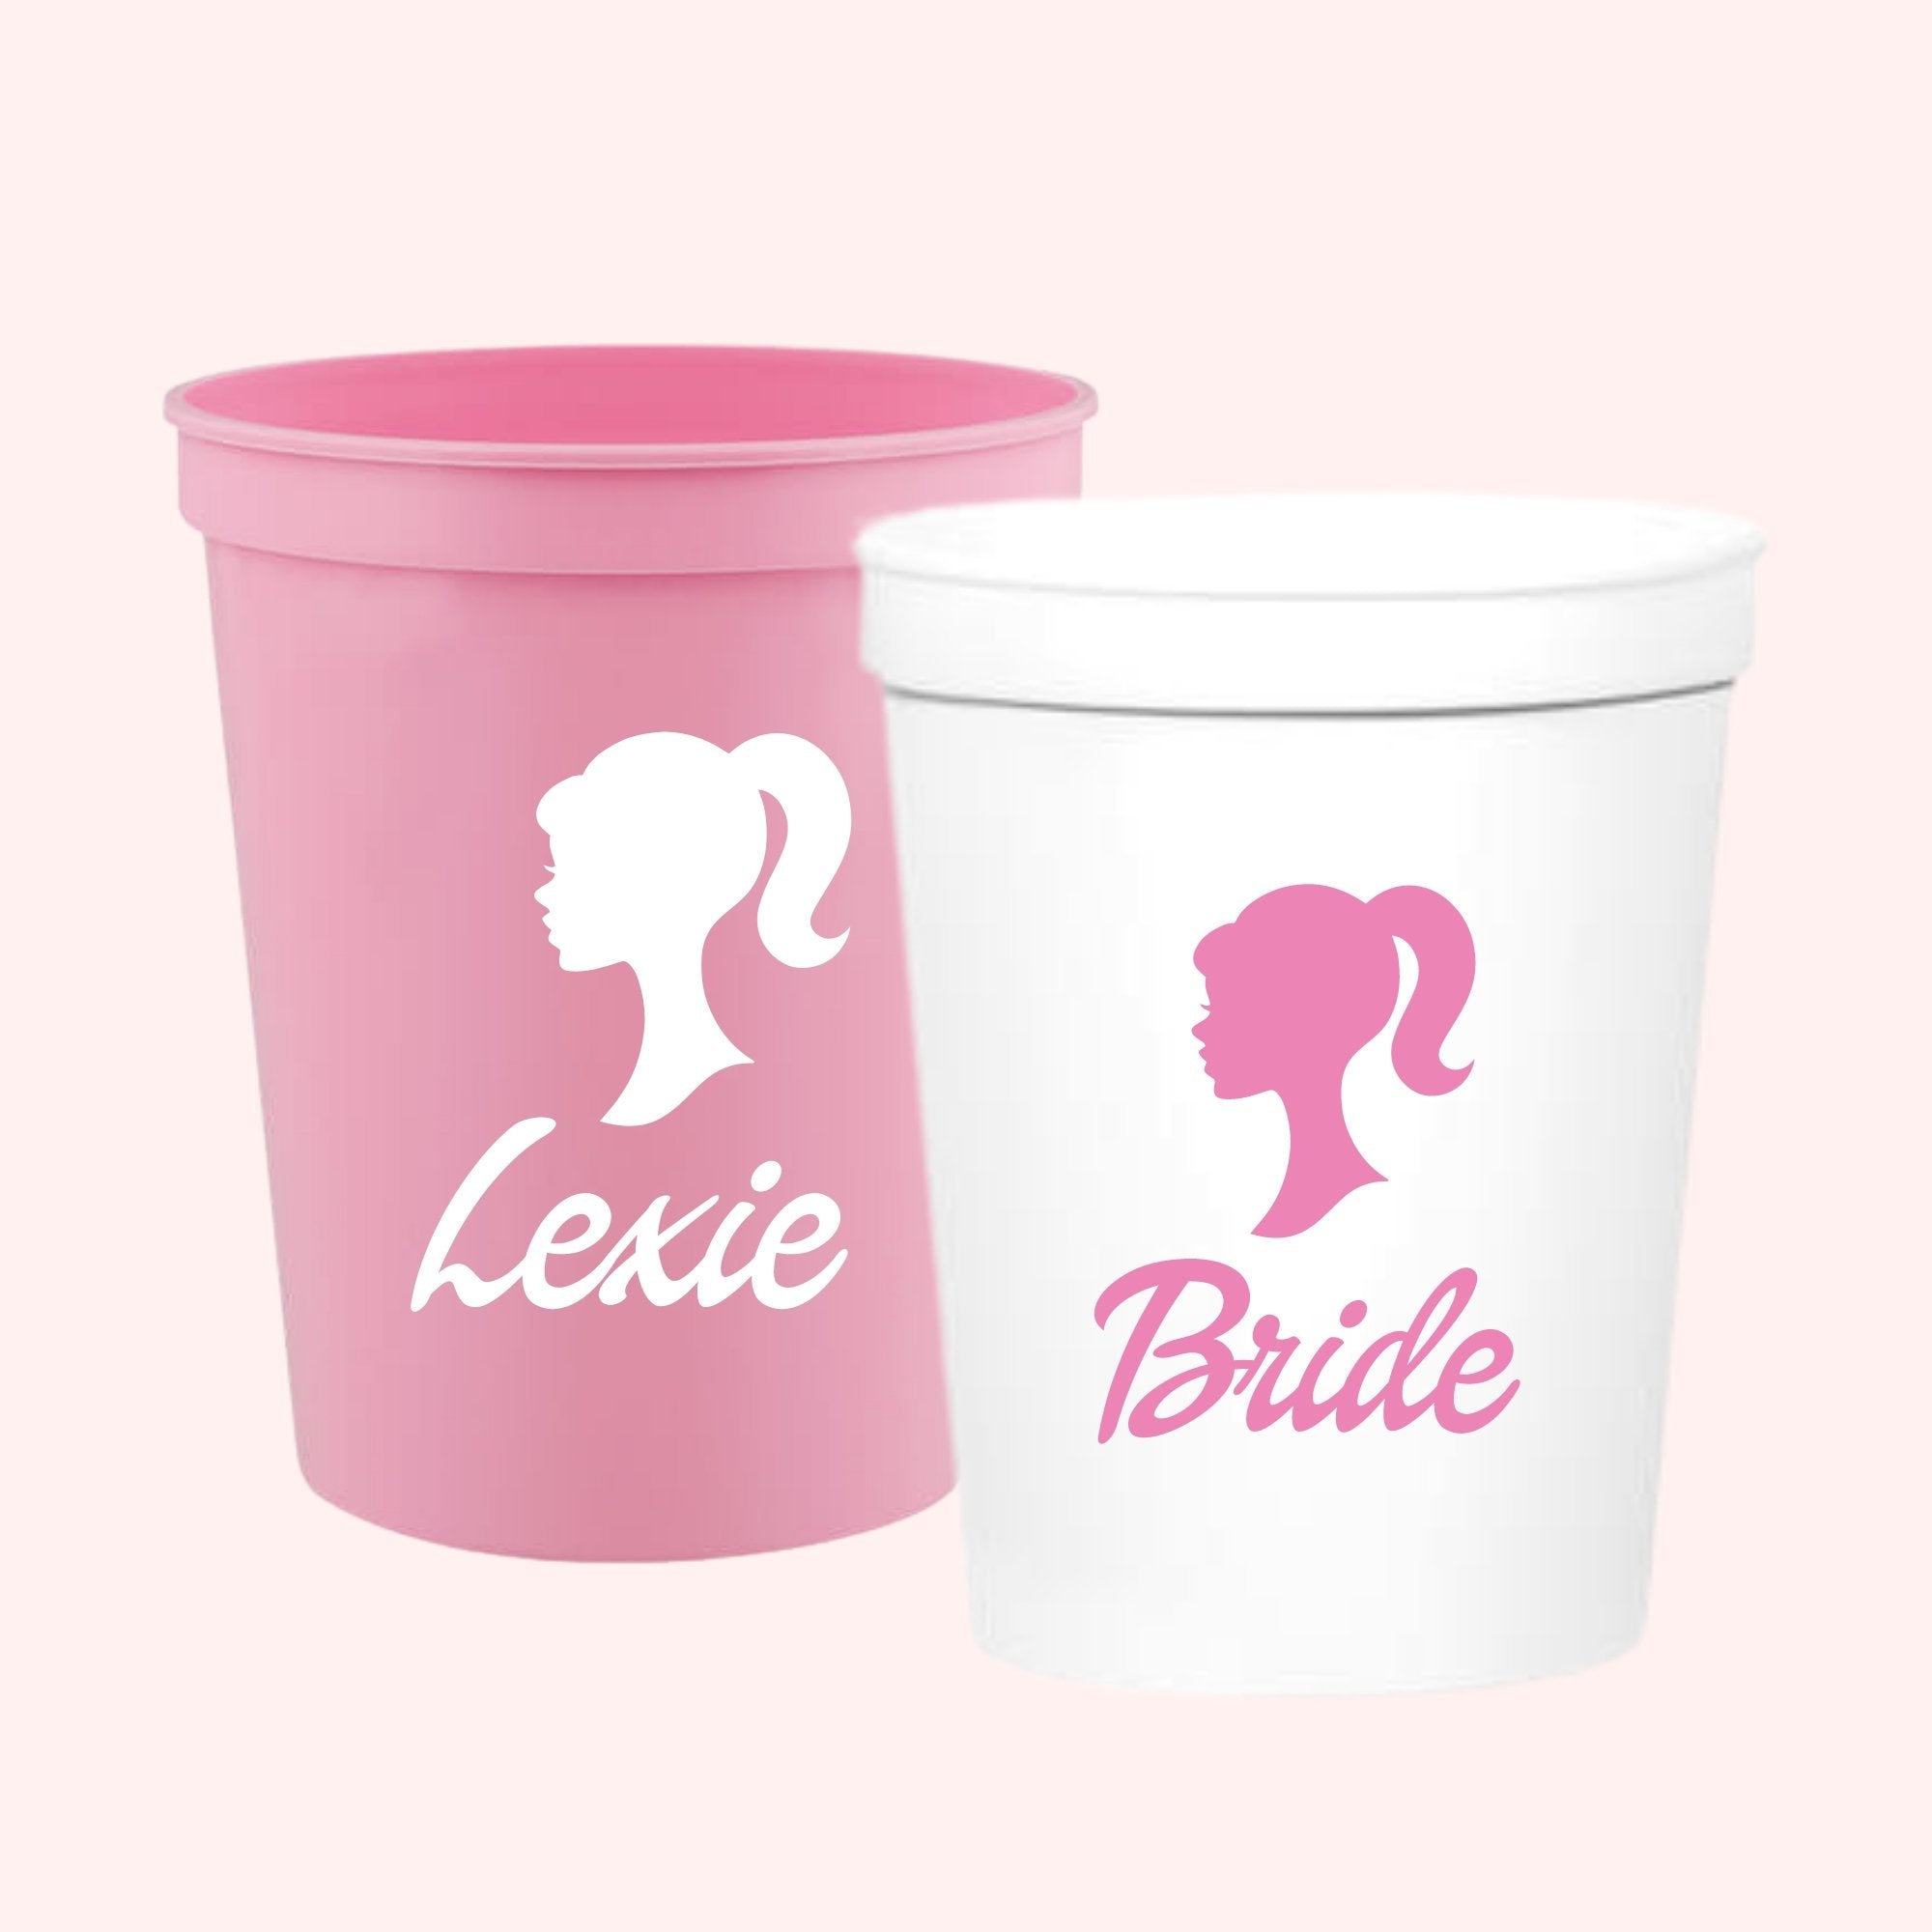 Let's Bach Party - Silhouette Stadium Cups